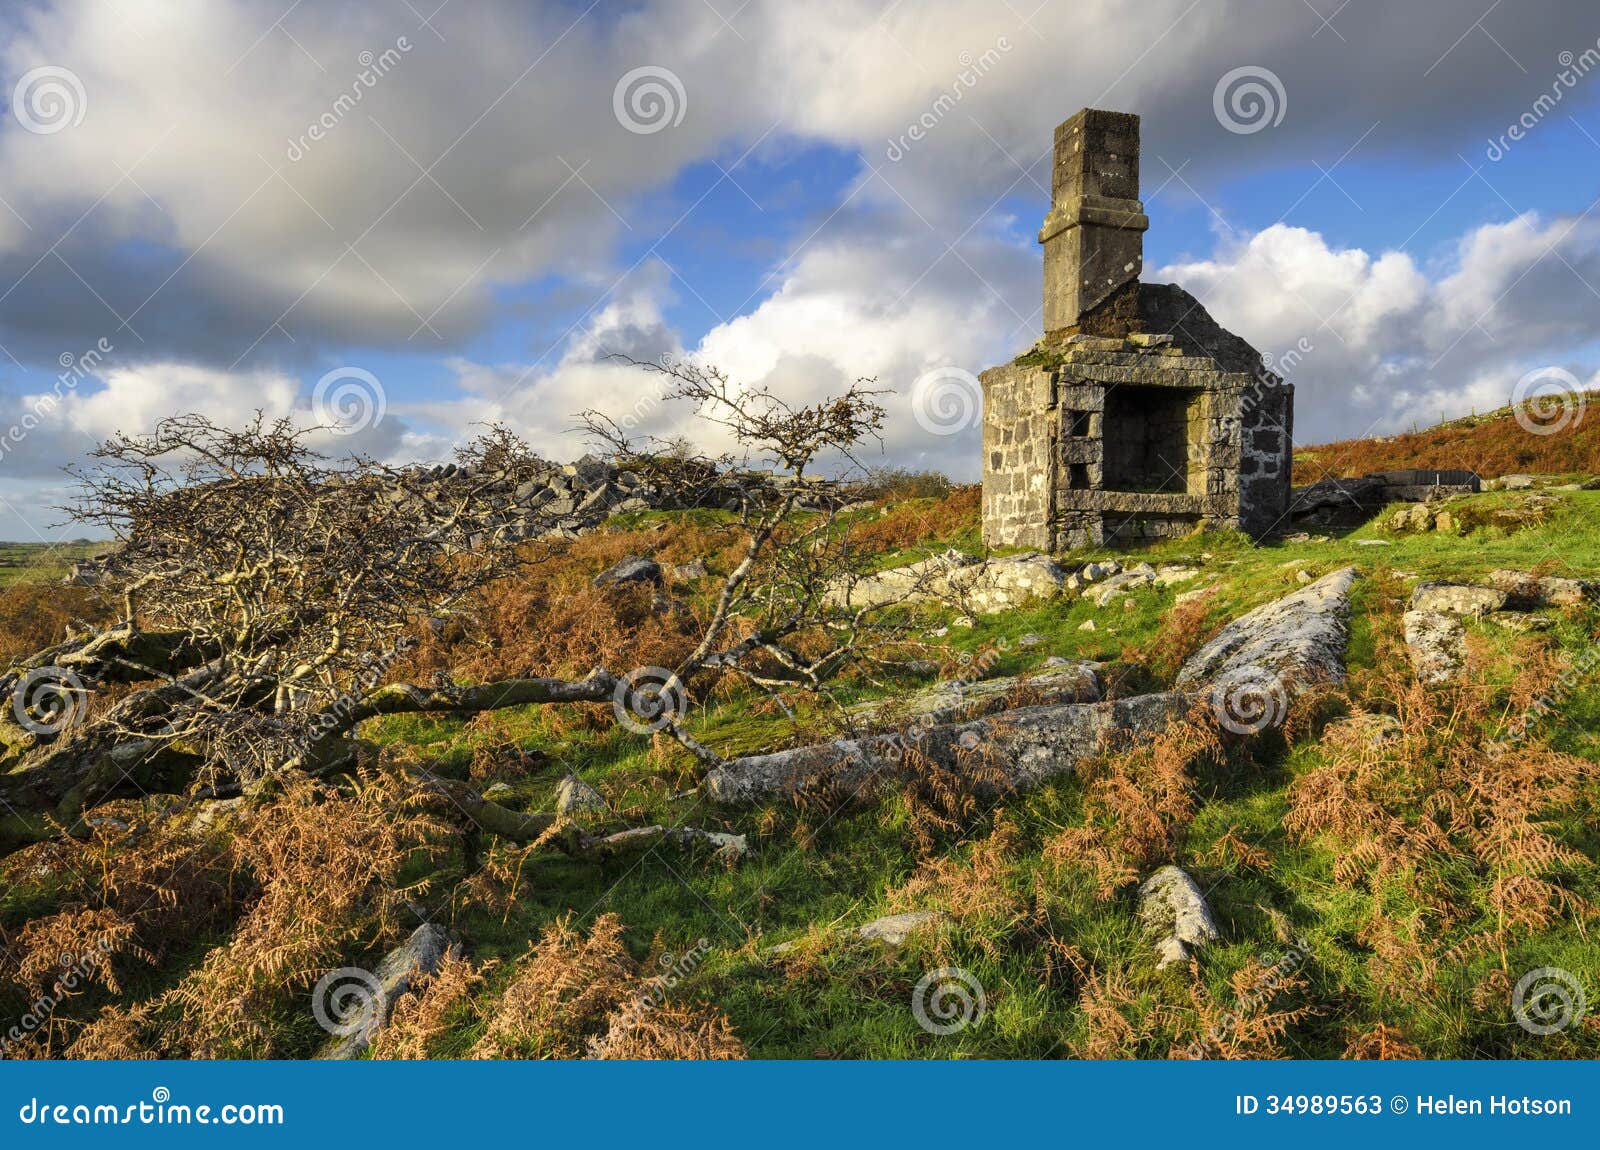 Carbilly Tor quarry by Dreambydesignphoto on DeviantArt